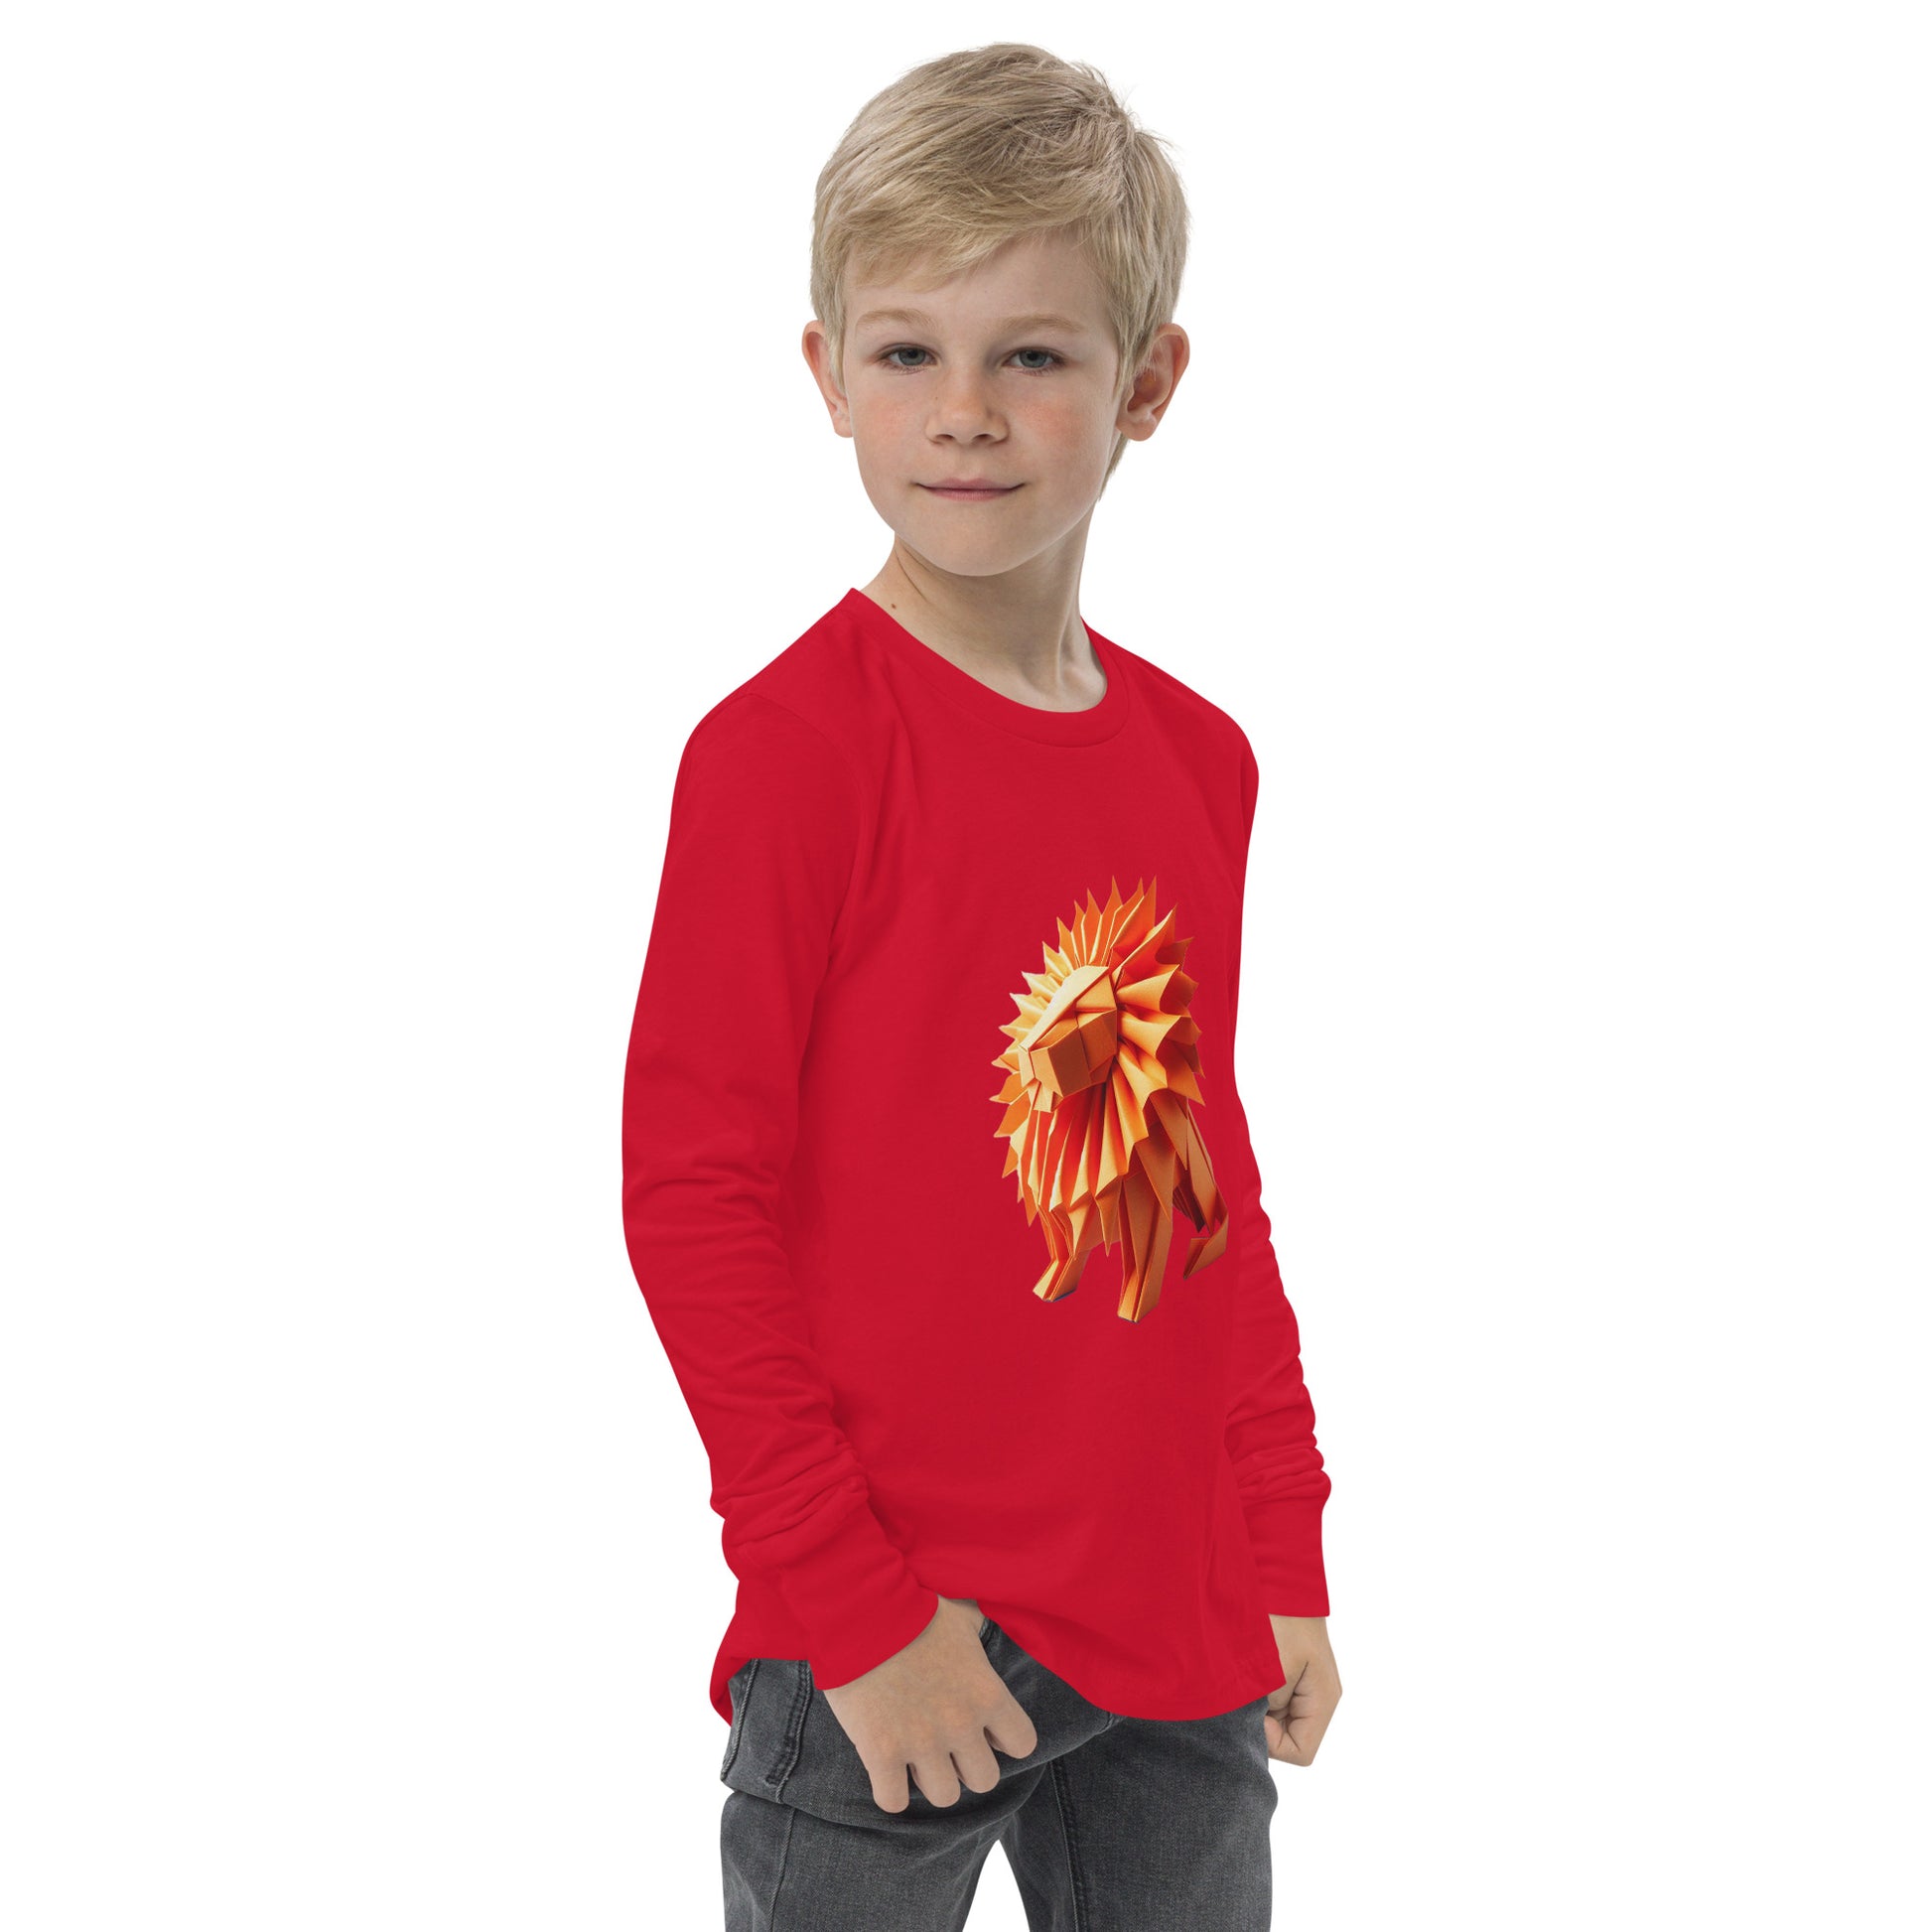 Youth with red long sleeve T-shirt with print of a lion